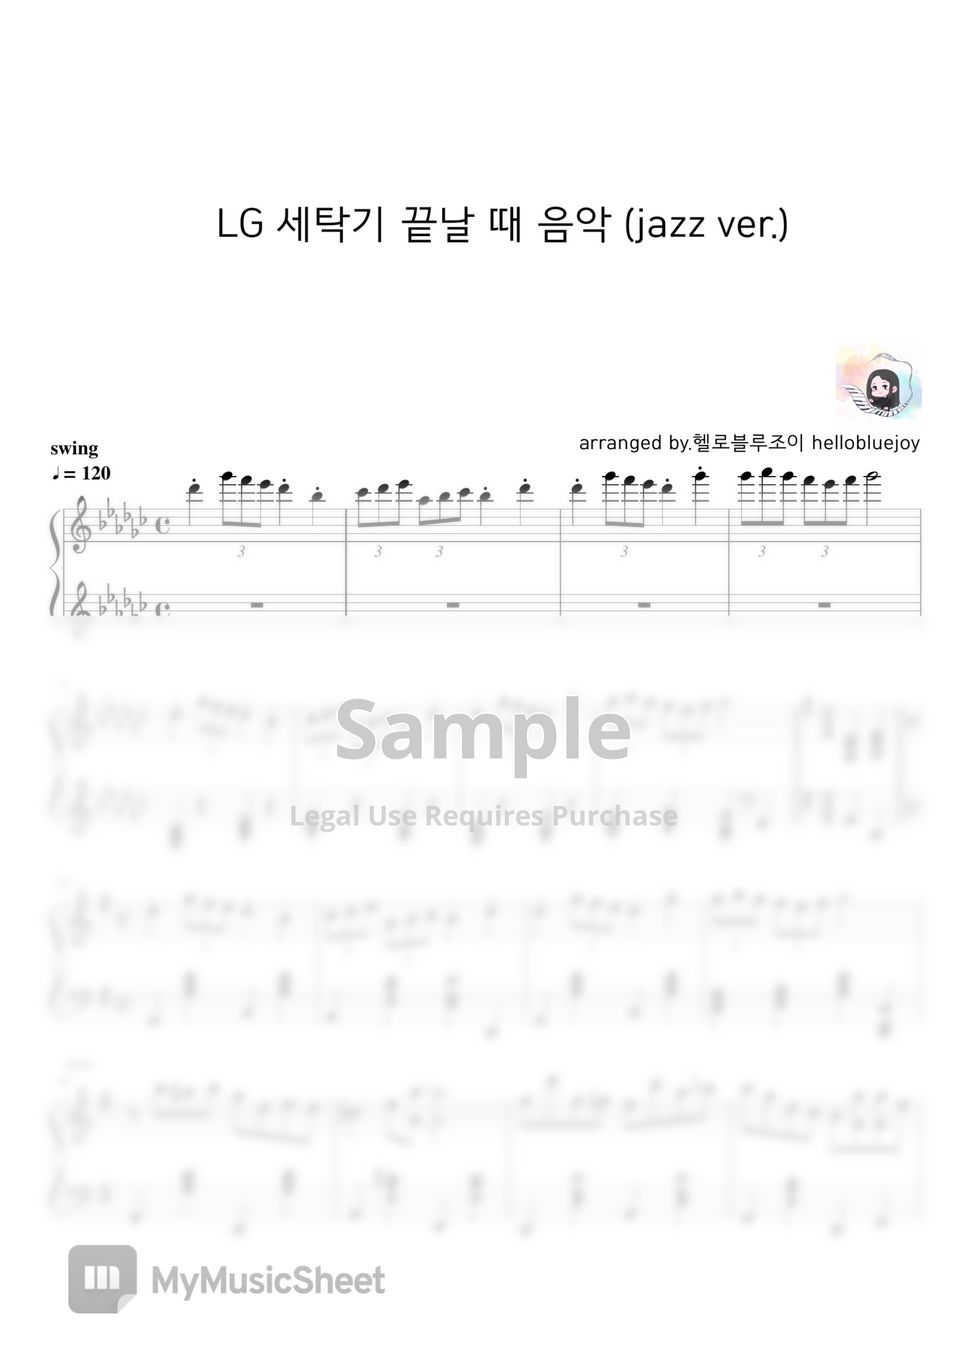 LG - Music when the lg washing machine is finished (jazz solo ver.) by hellobluejoy